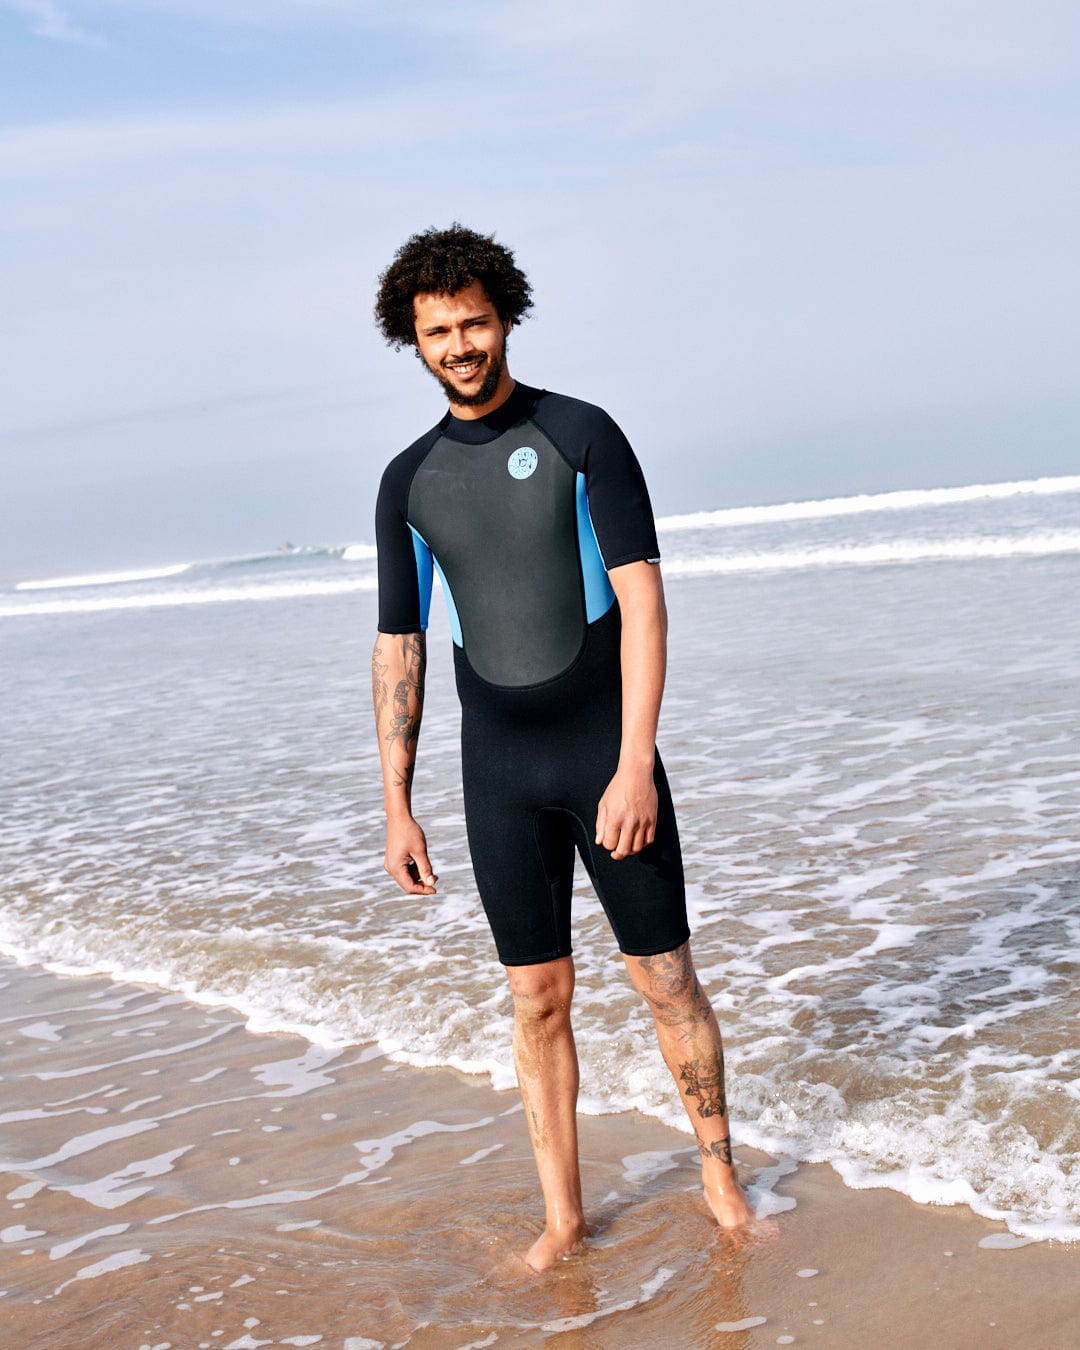 A man in a Core - Men's 3/2 Shortie Wetsuit in Black/blue by Saltrock standing on a sandy beach with waves in the background, smiling at the camera.